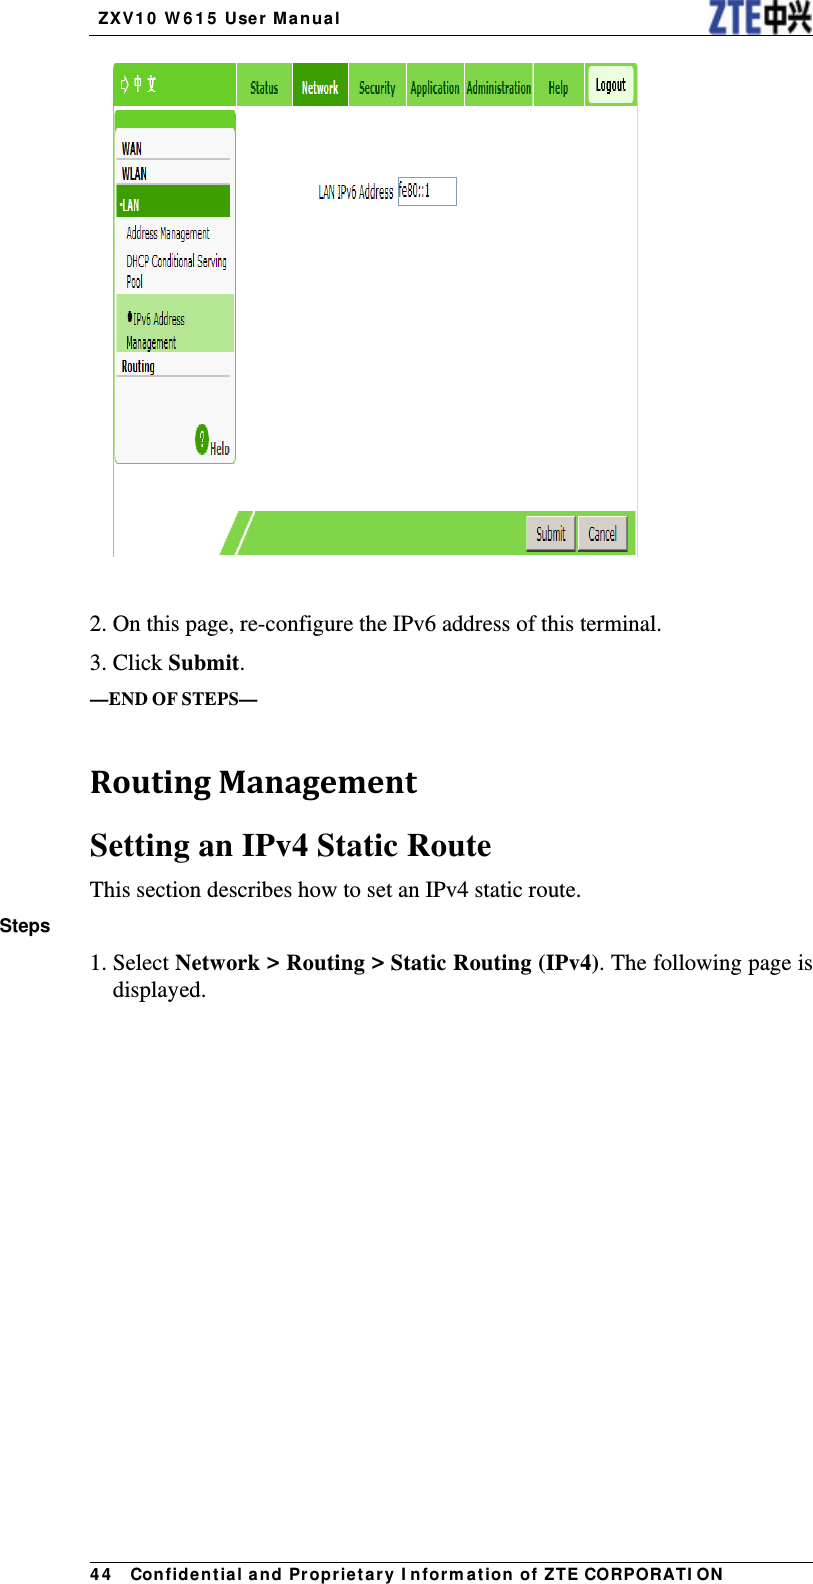   ZX V1 0  W 6 1 5  User Manua l 4 4   Con fidential and Pr opr ietary I nform a t ion of ZTE CORPORATI ON   2. On this page, re-configure the IPv6 address of this terminal. 3. Click Submit. —END OF STEPS—  RoutingManagementSetting an IPv4 Static Route This section describes how to set an IPv4 static route. Steps 1. Select Network &gt; Routing &gt; Static Routing (IPv4). The following page is displayed. 